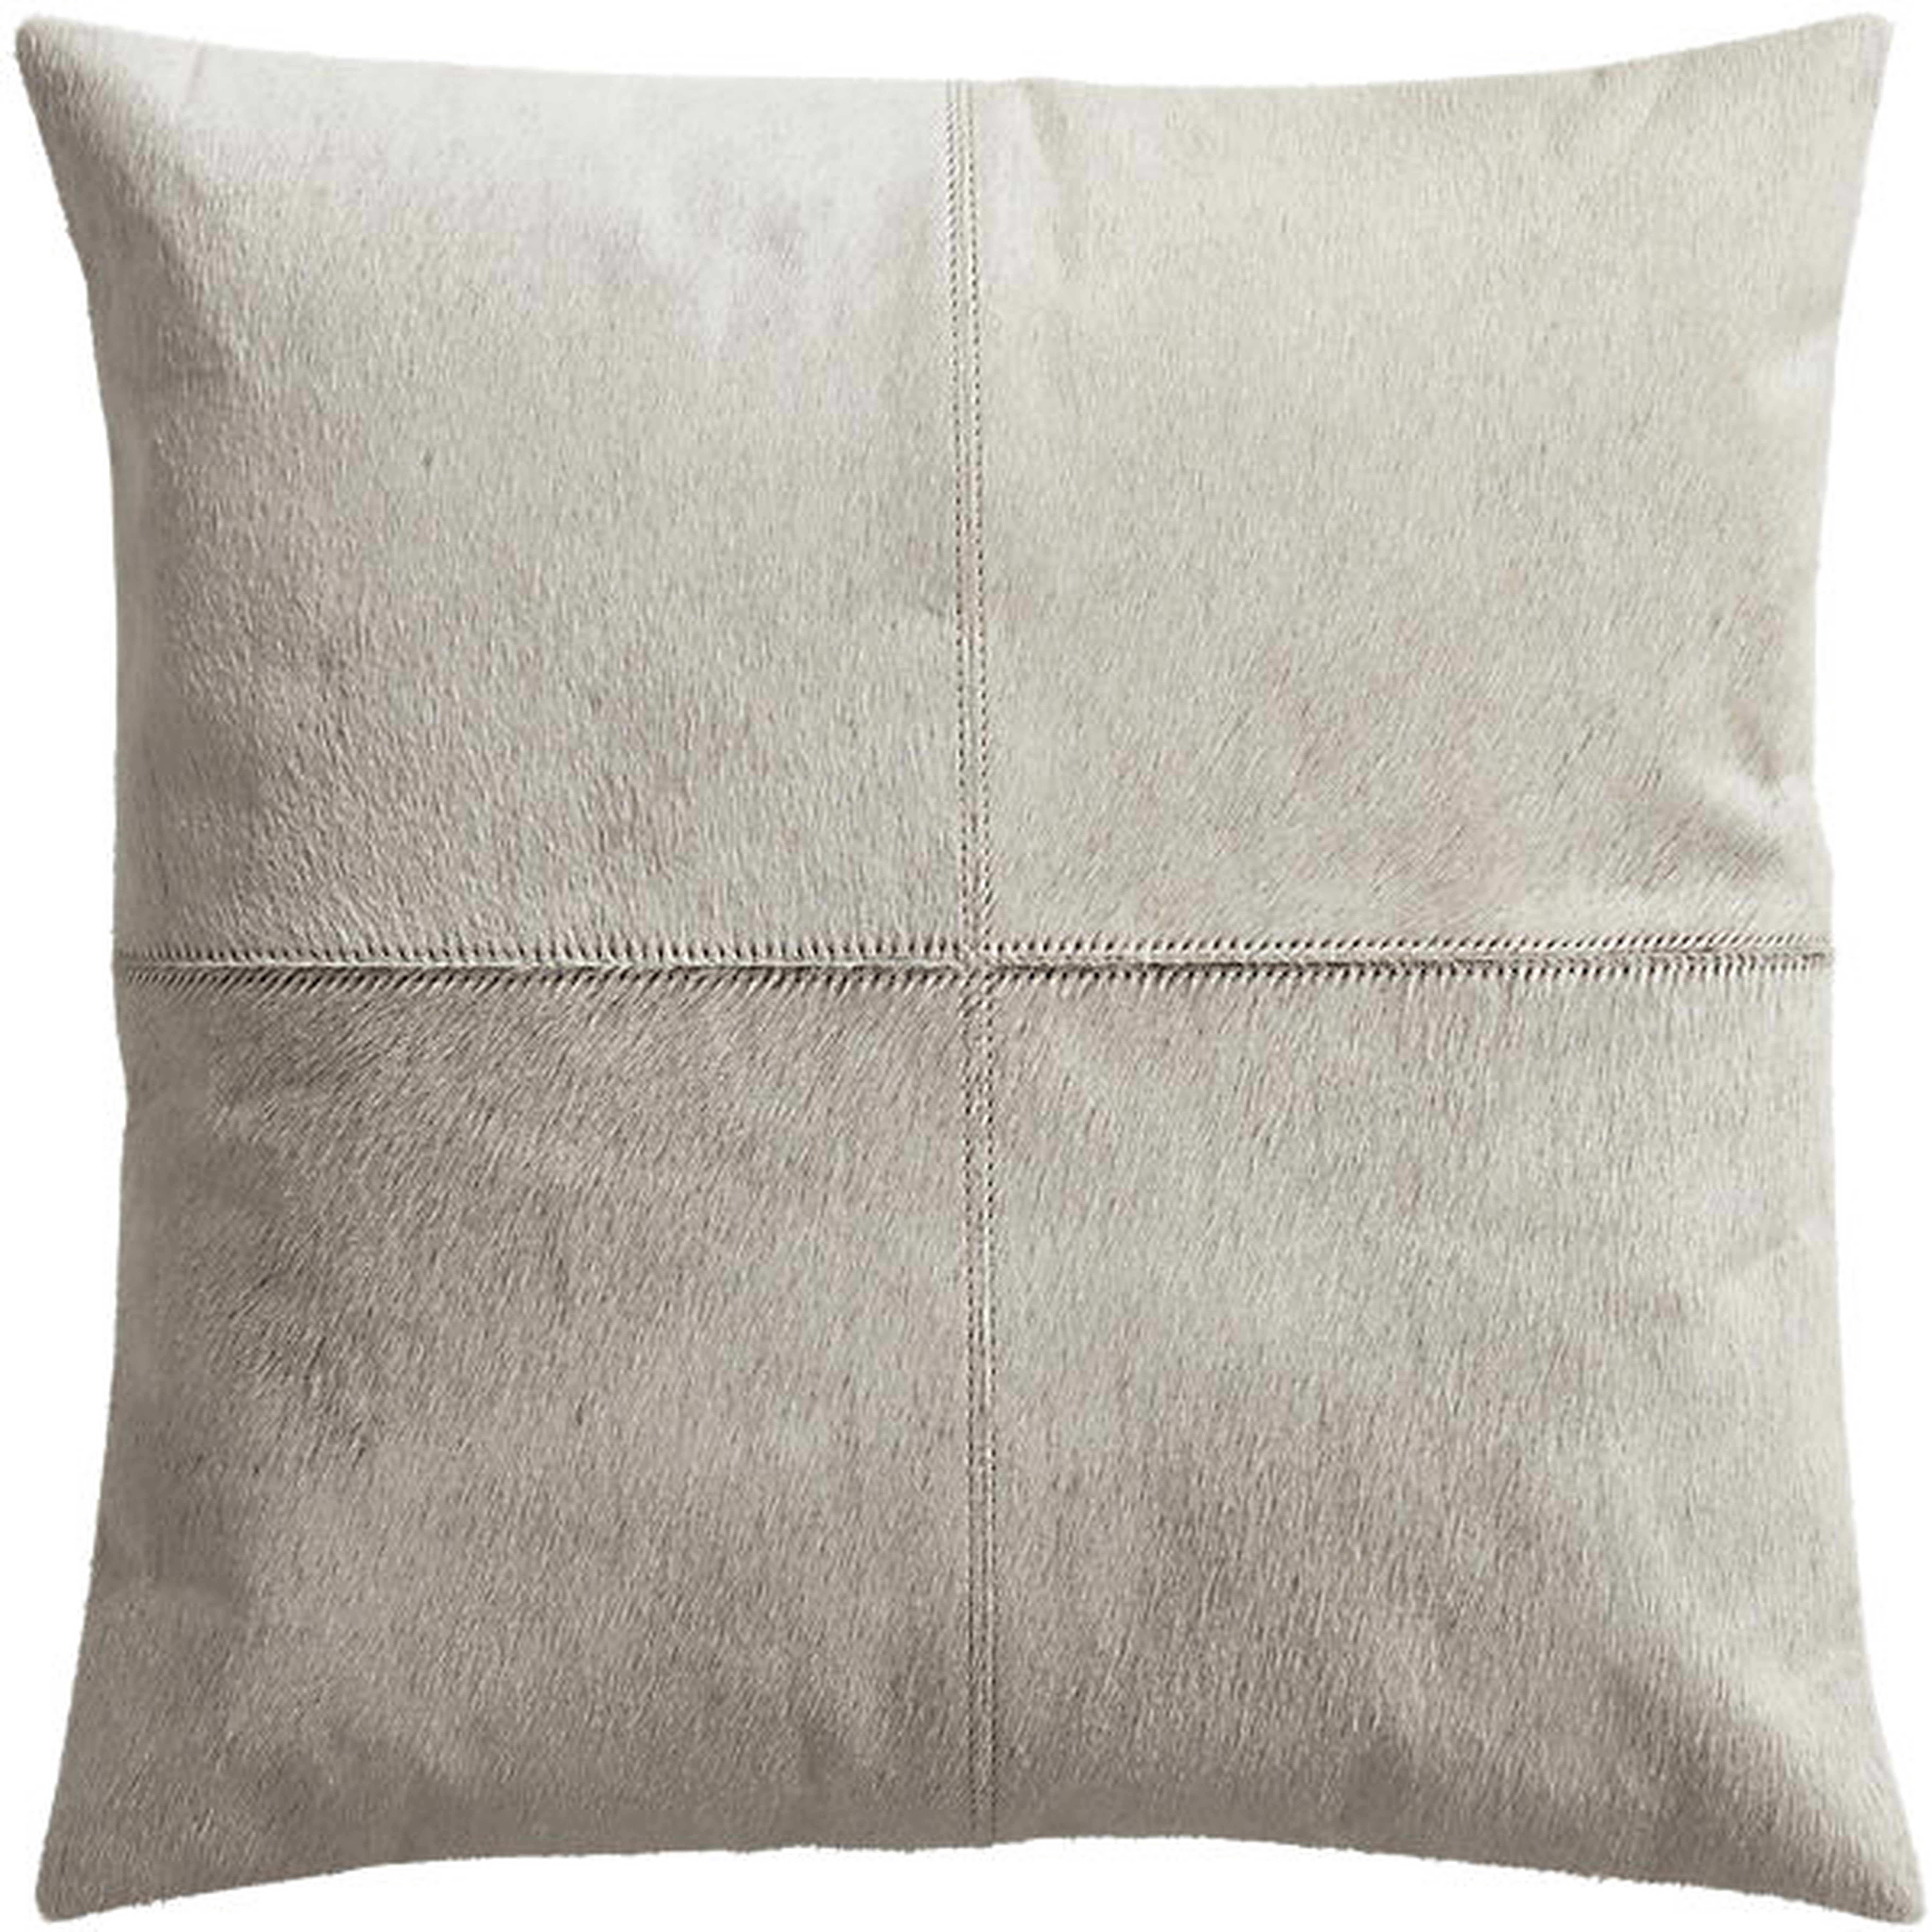 Abele 18" pillow with insert - CB2